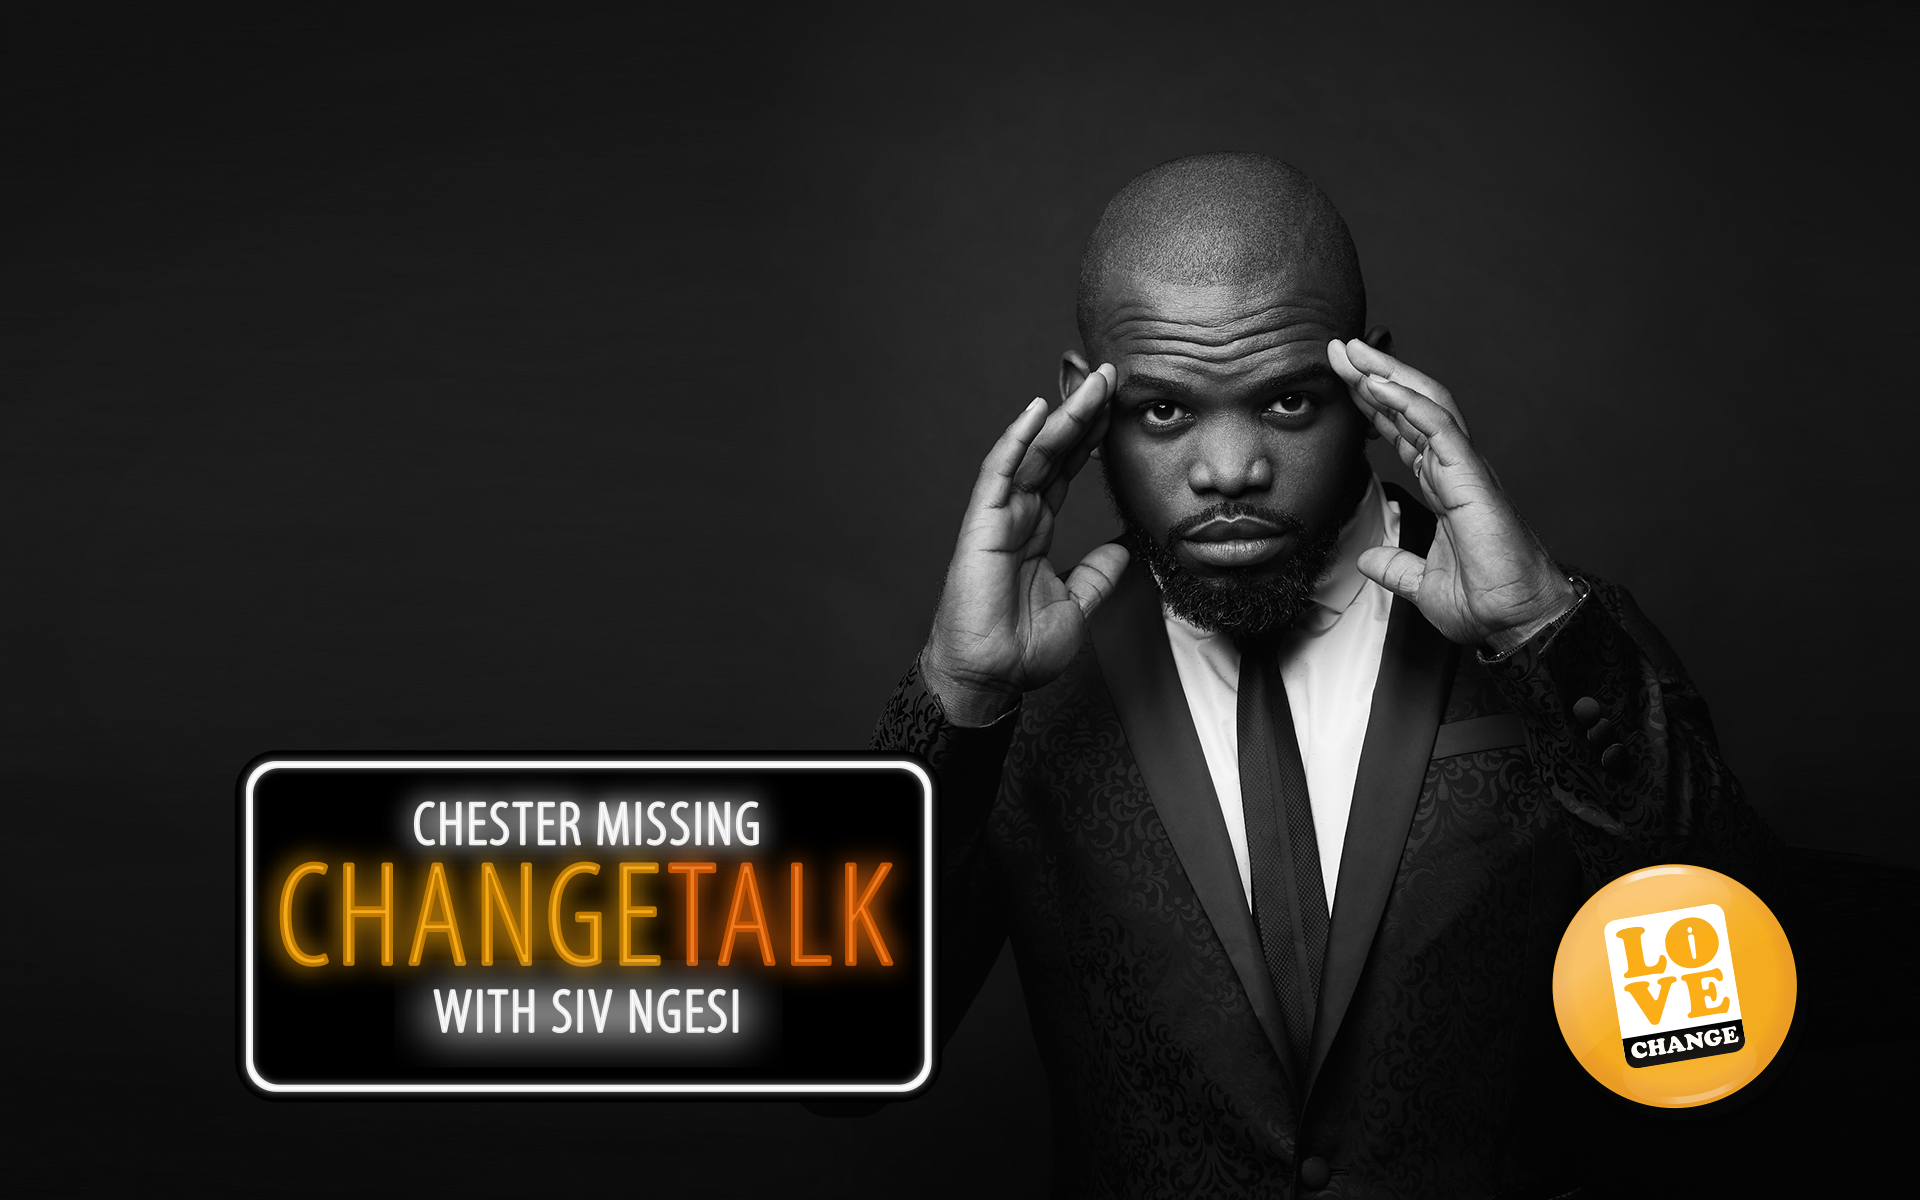 Change Talk - Chester Missing with Siv Ngesi